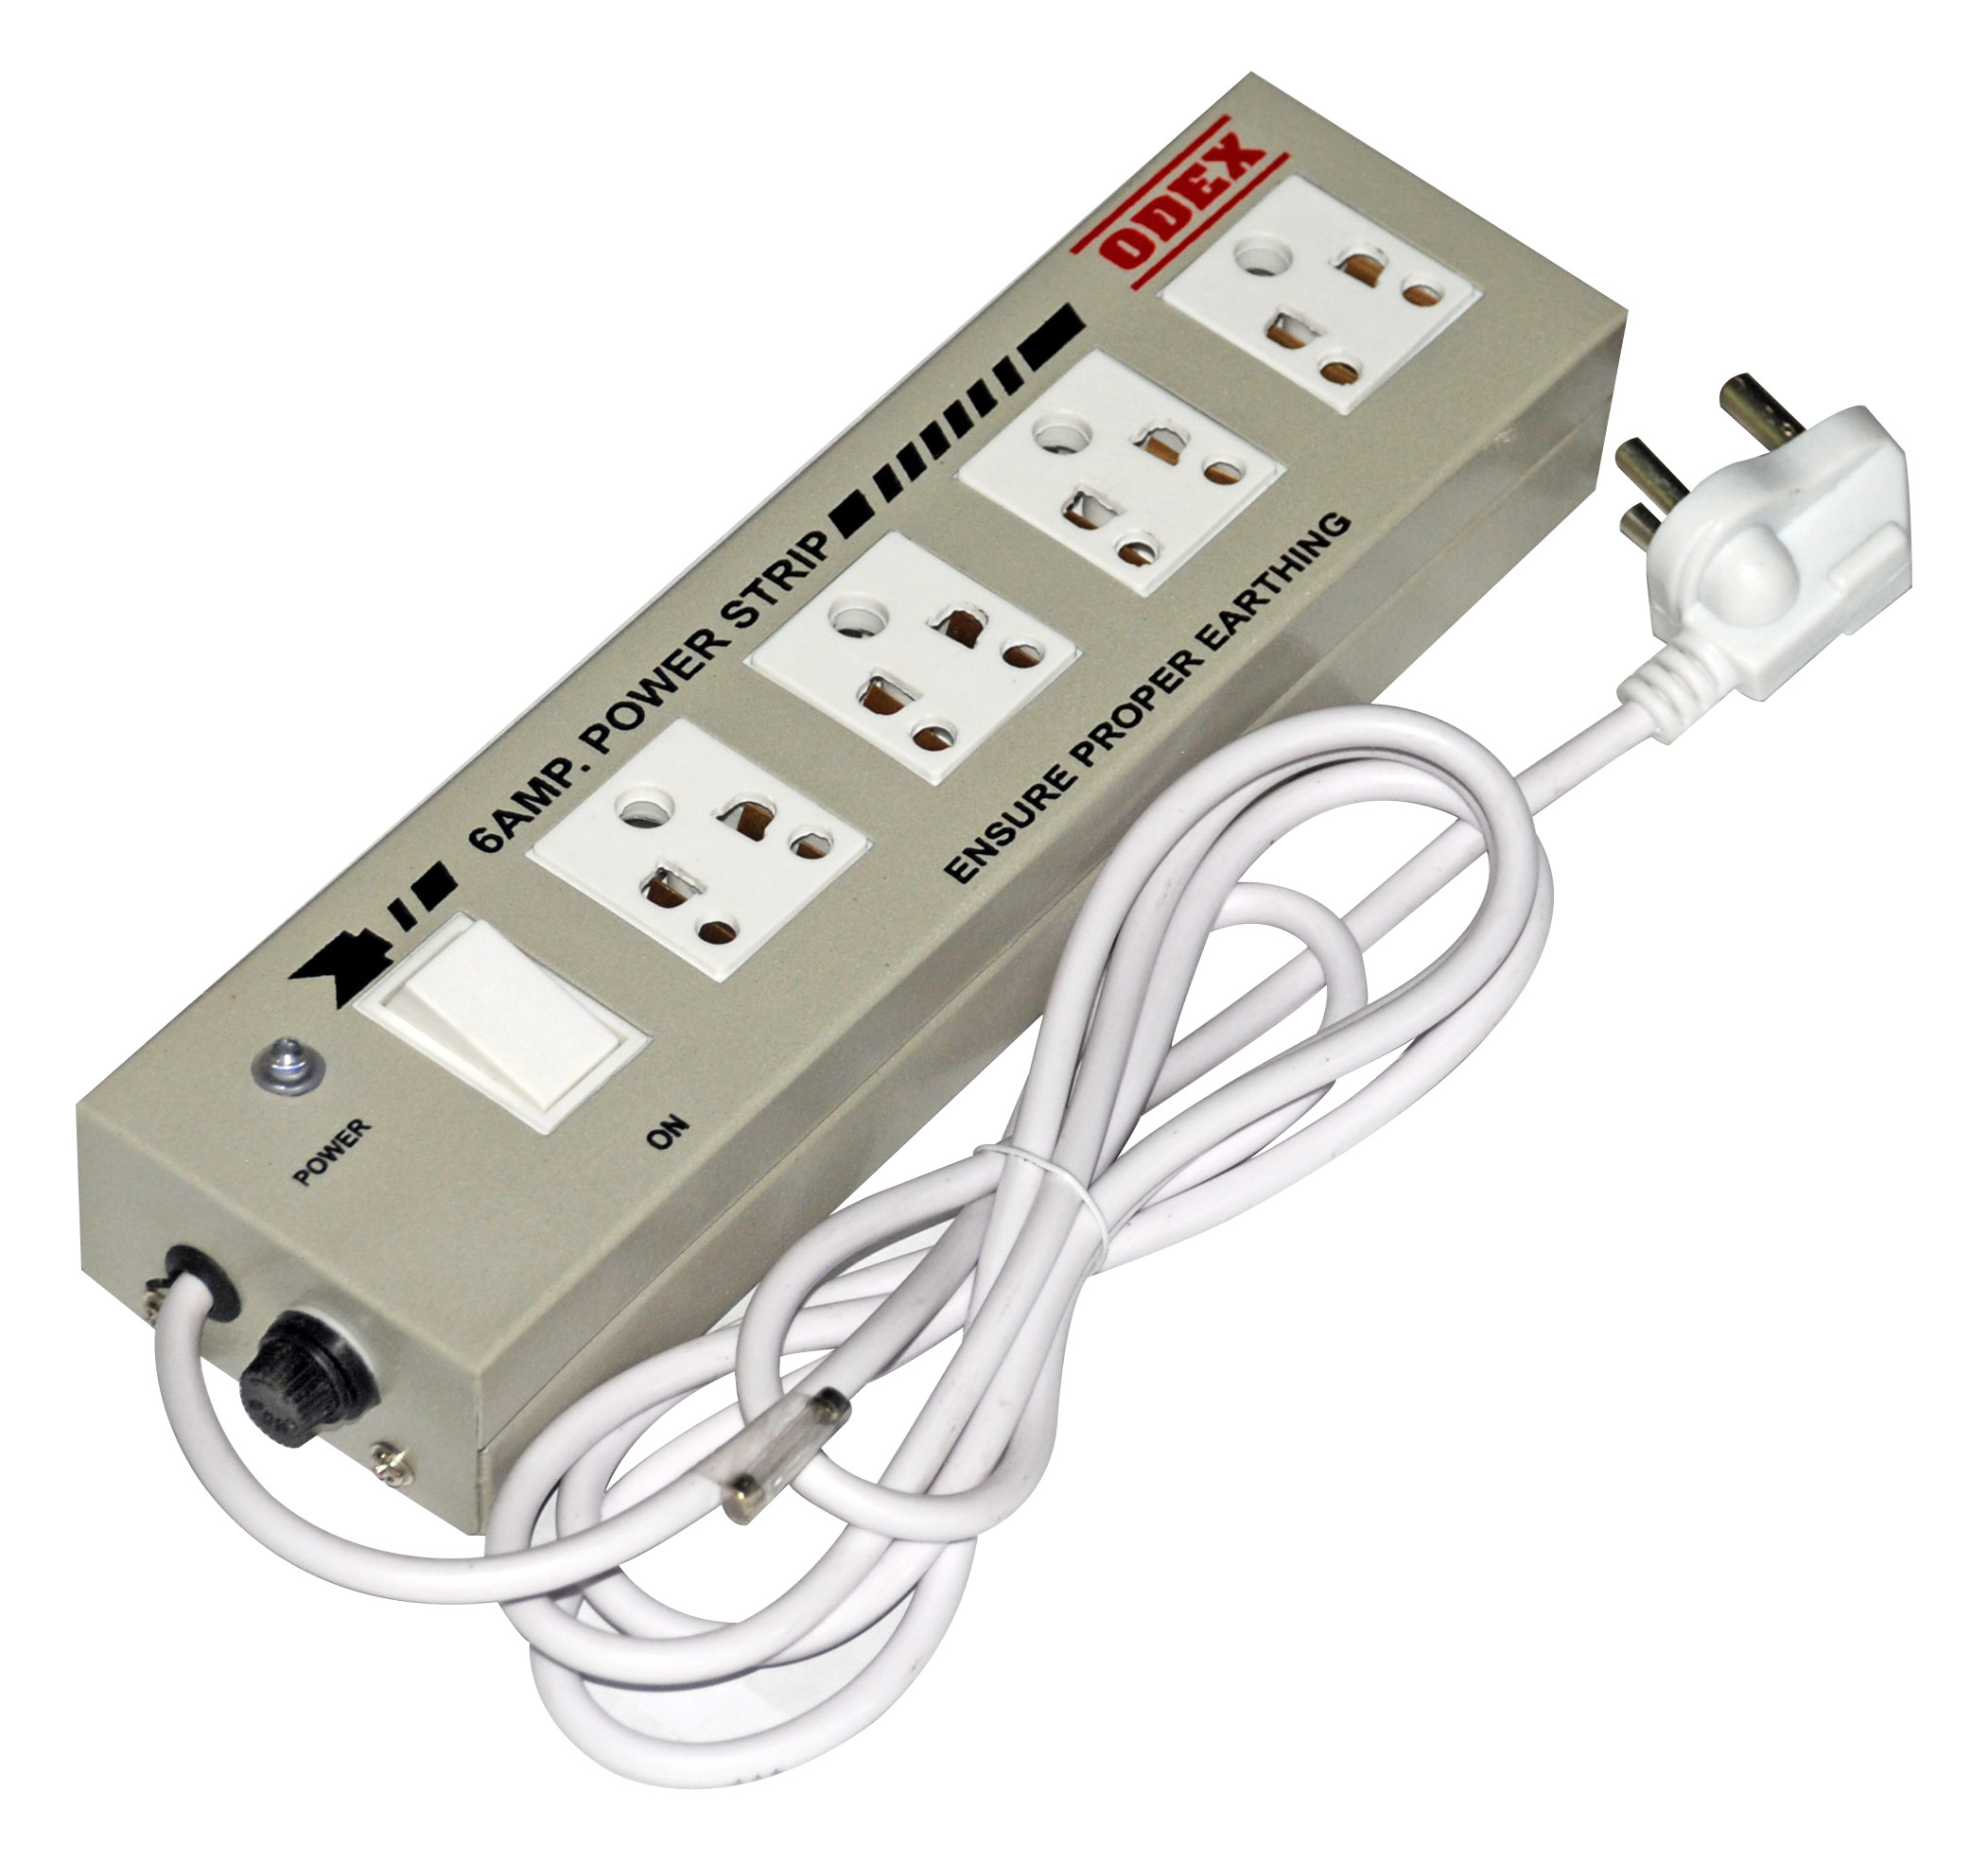 Buy Extension Cord Board Power Strip With Fuse Surge Protector 41 6a 6883